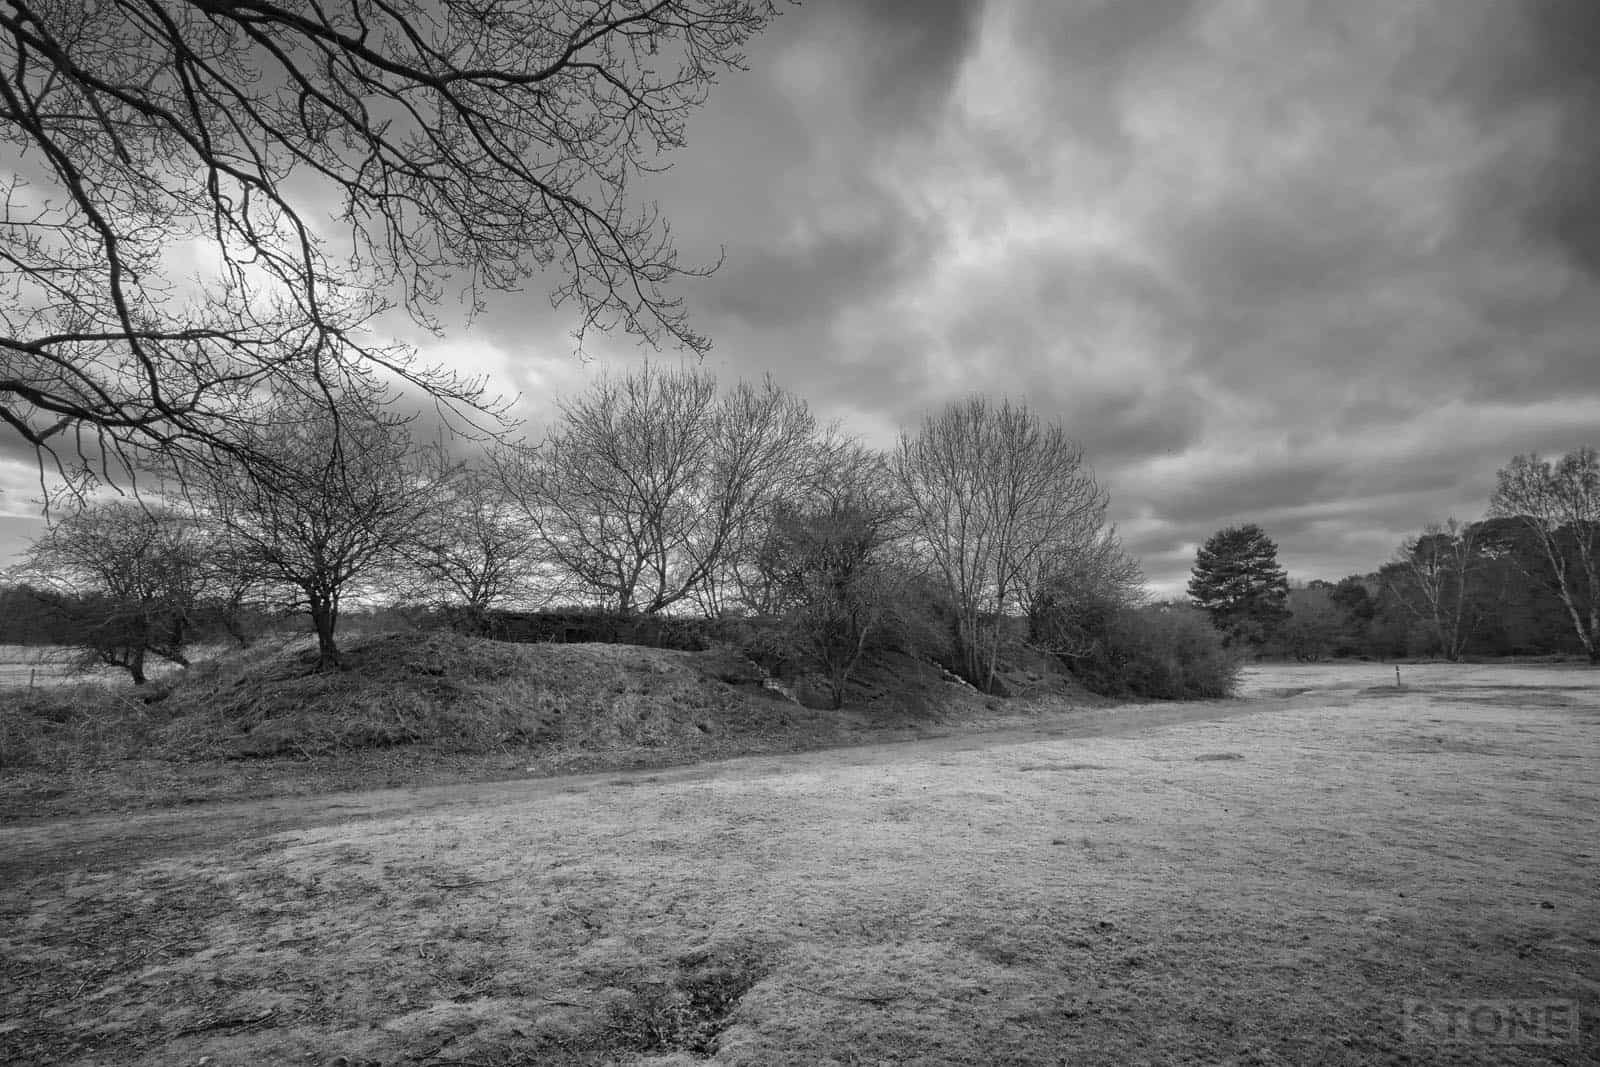 Lost in a landscape: Wretham Circles